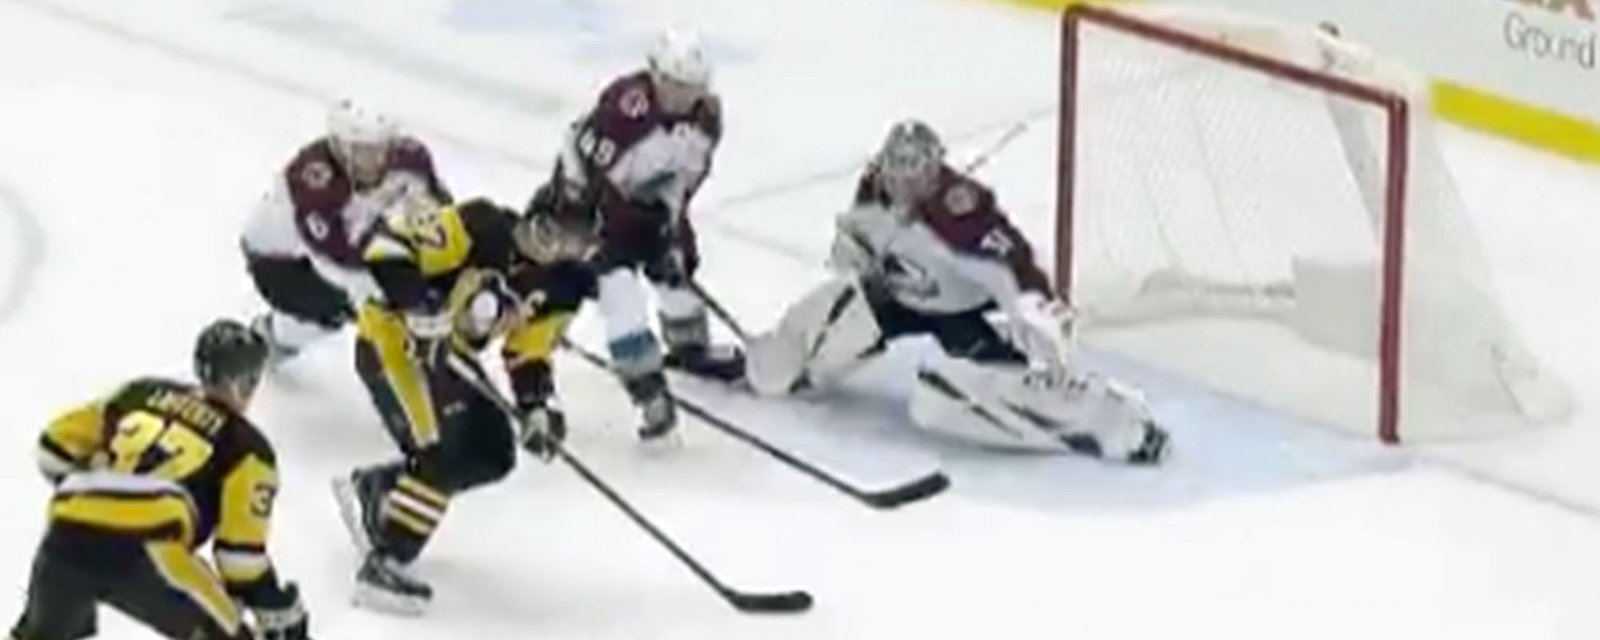 Crosby beats three Avs to score an early goal of the year candidate